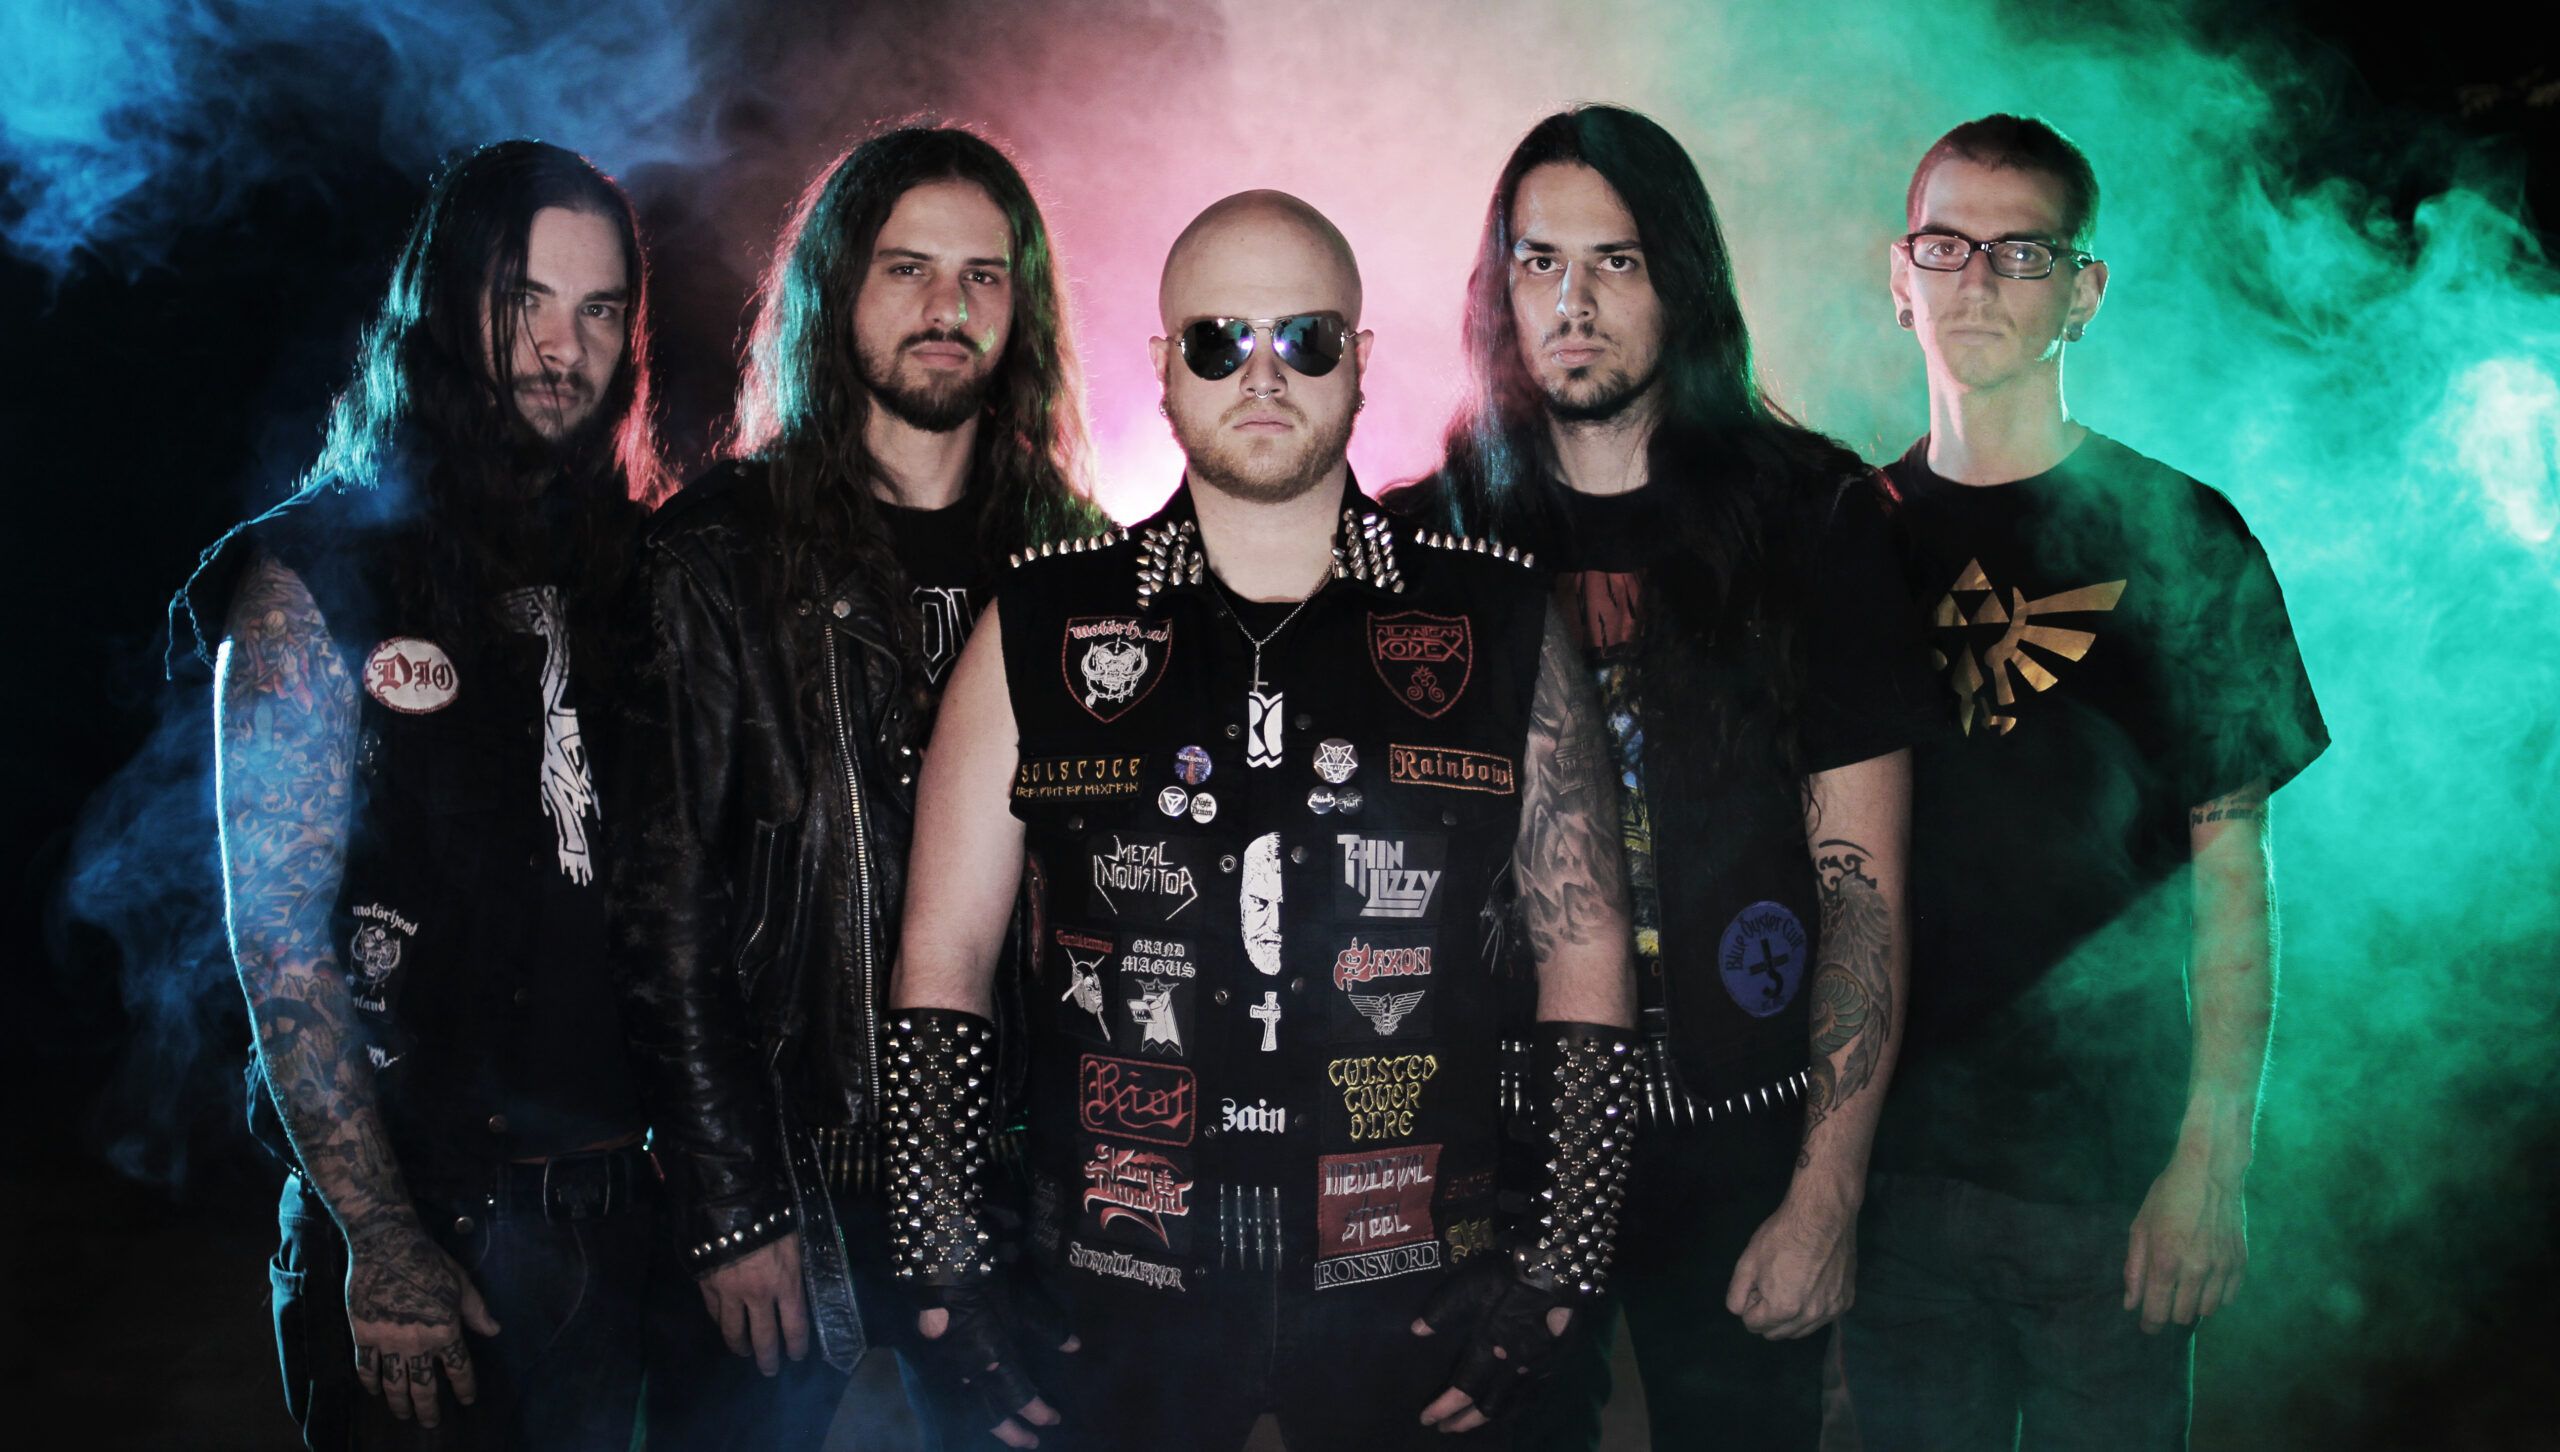 Visigoth streamen 'From The Arcane Mists Of Prophecy'